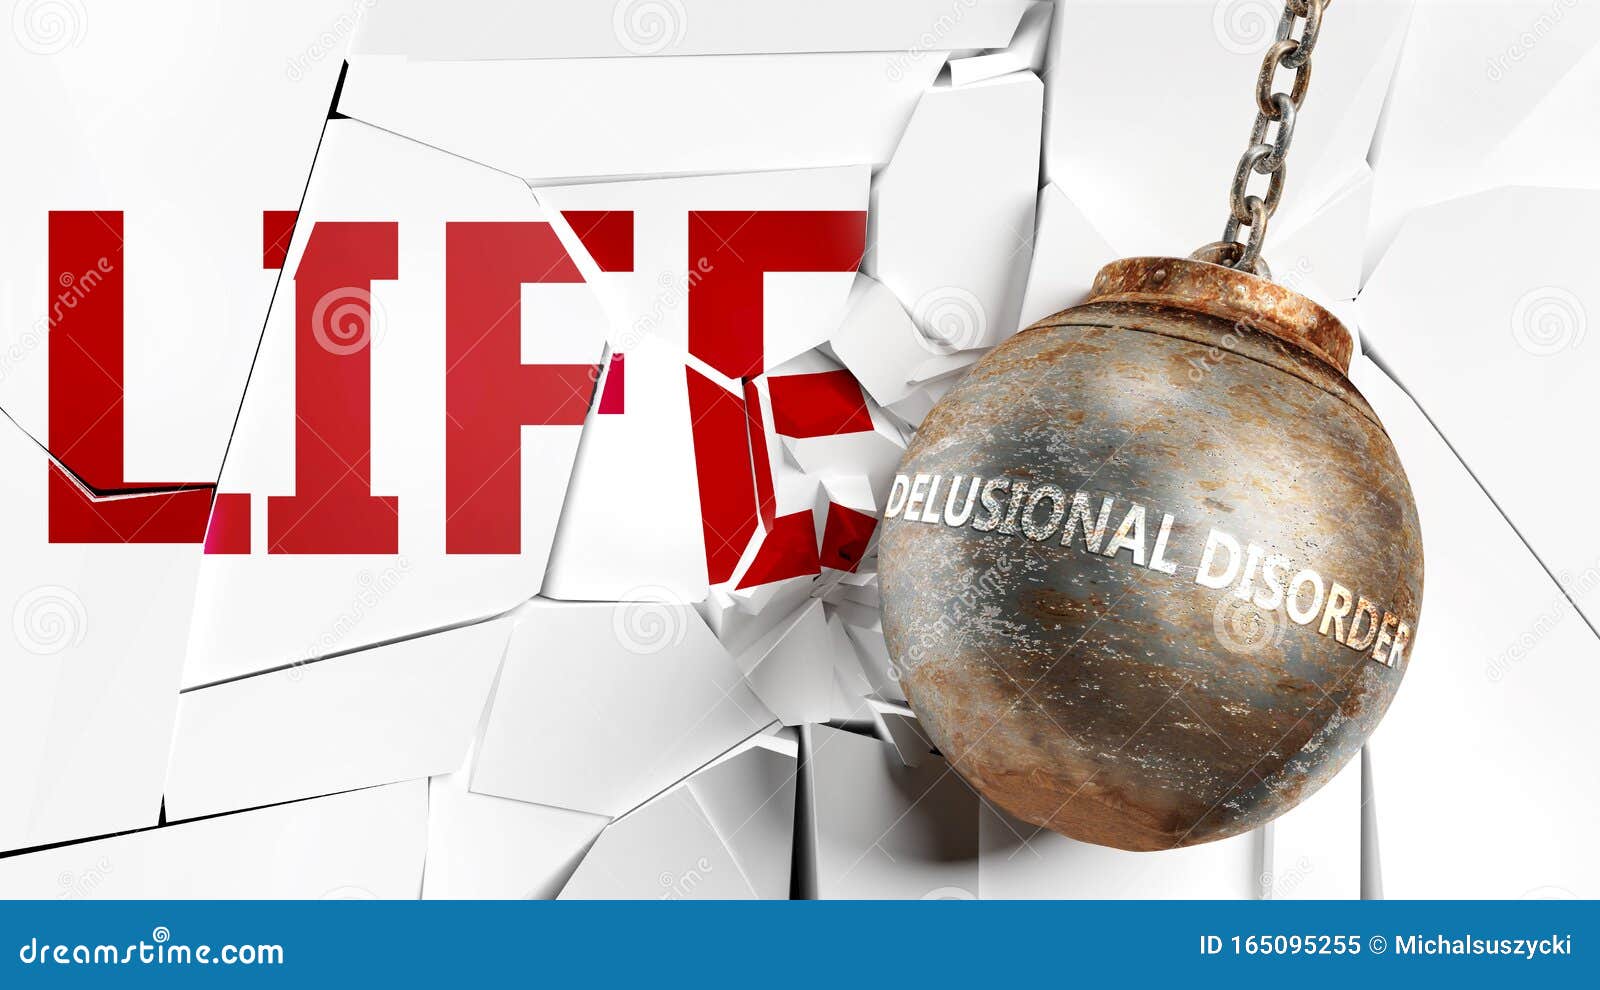 delusional disorder and life - pictured as a word delusional disorder and a wreck ball to ize that delusional disorder can